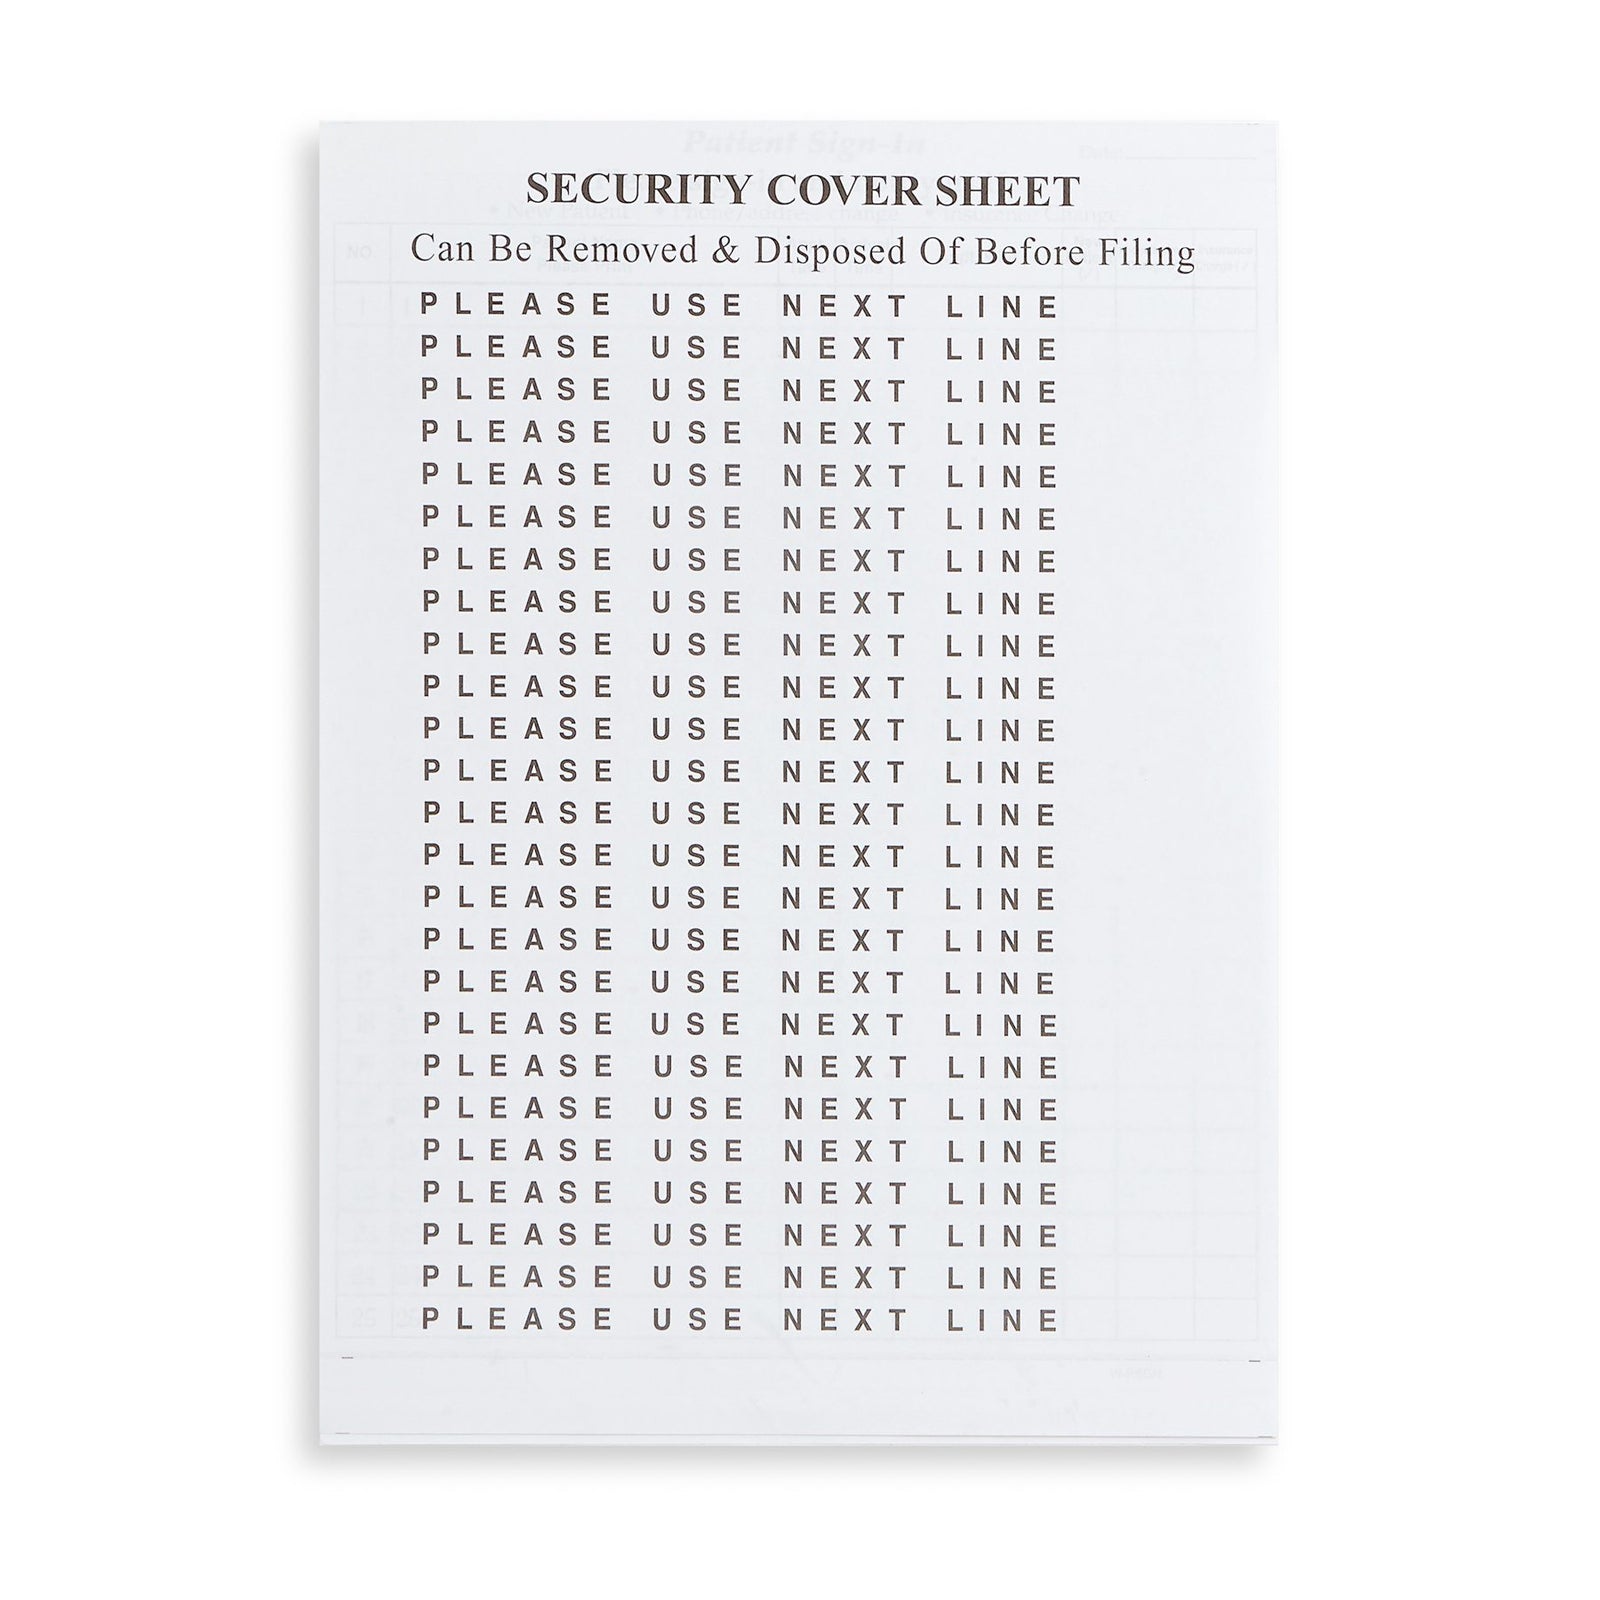 Blue Summit Supplies HIPAA Compliant Sign In Sheets 125 Sheets